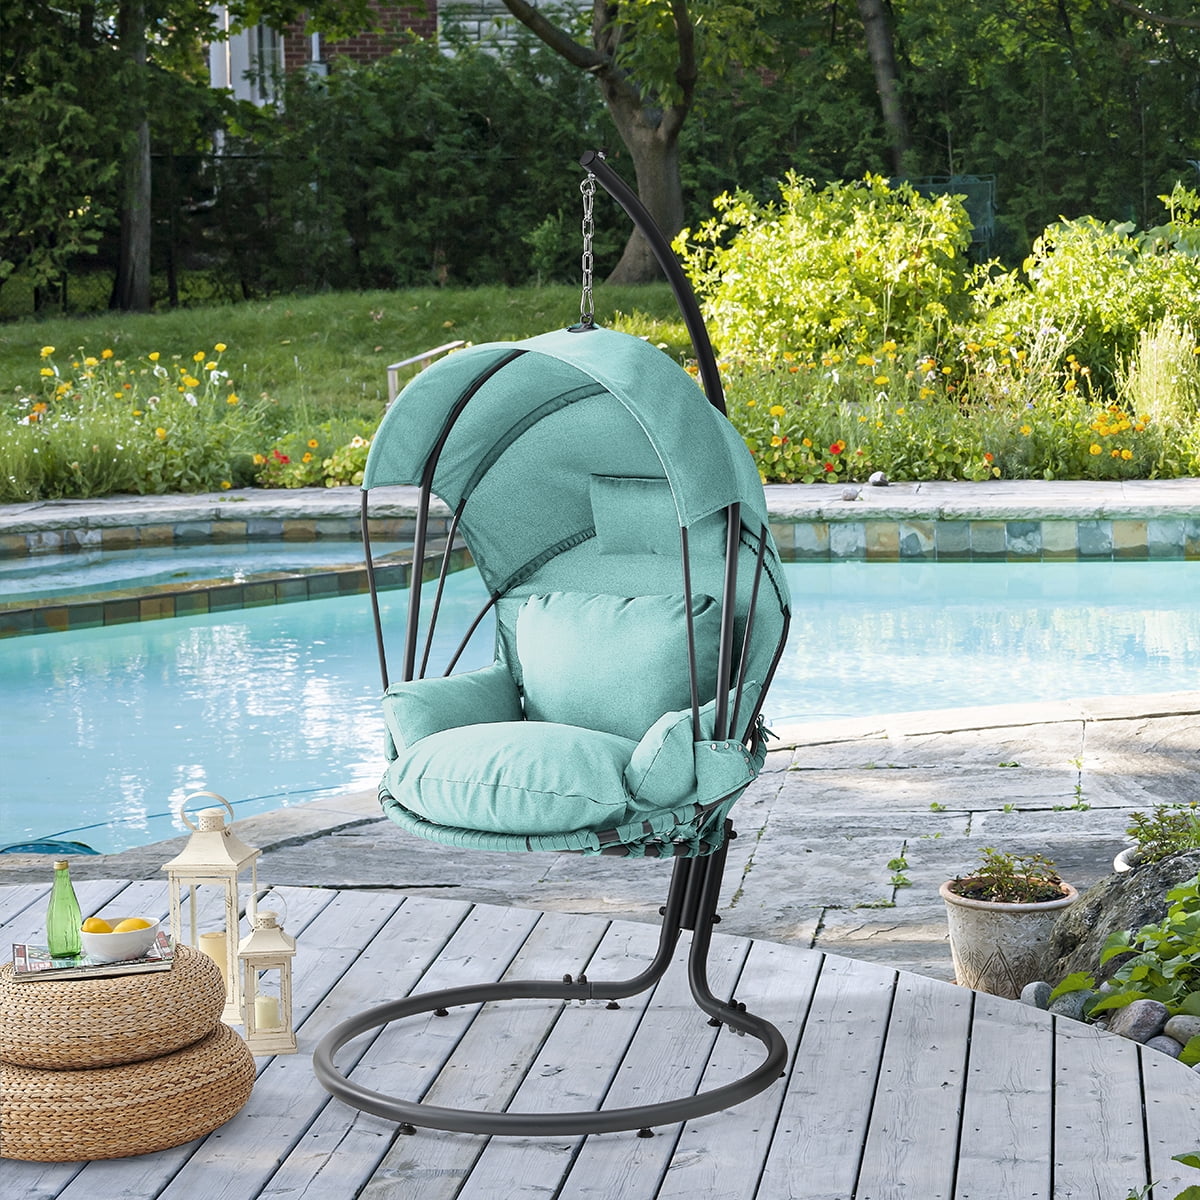 Details about   Outdoor Hanging Swing Lounge Chair Deep Seat Cushion Canopy with Stand Grey 